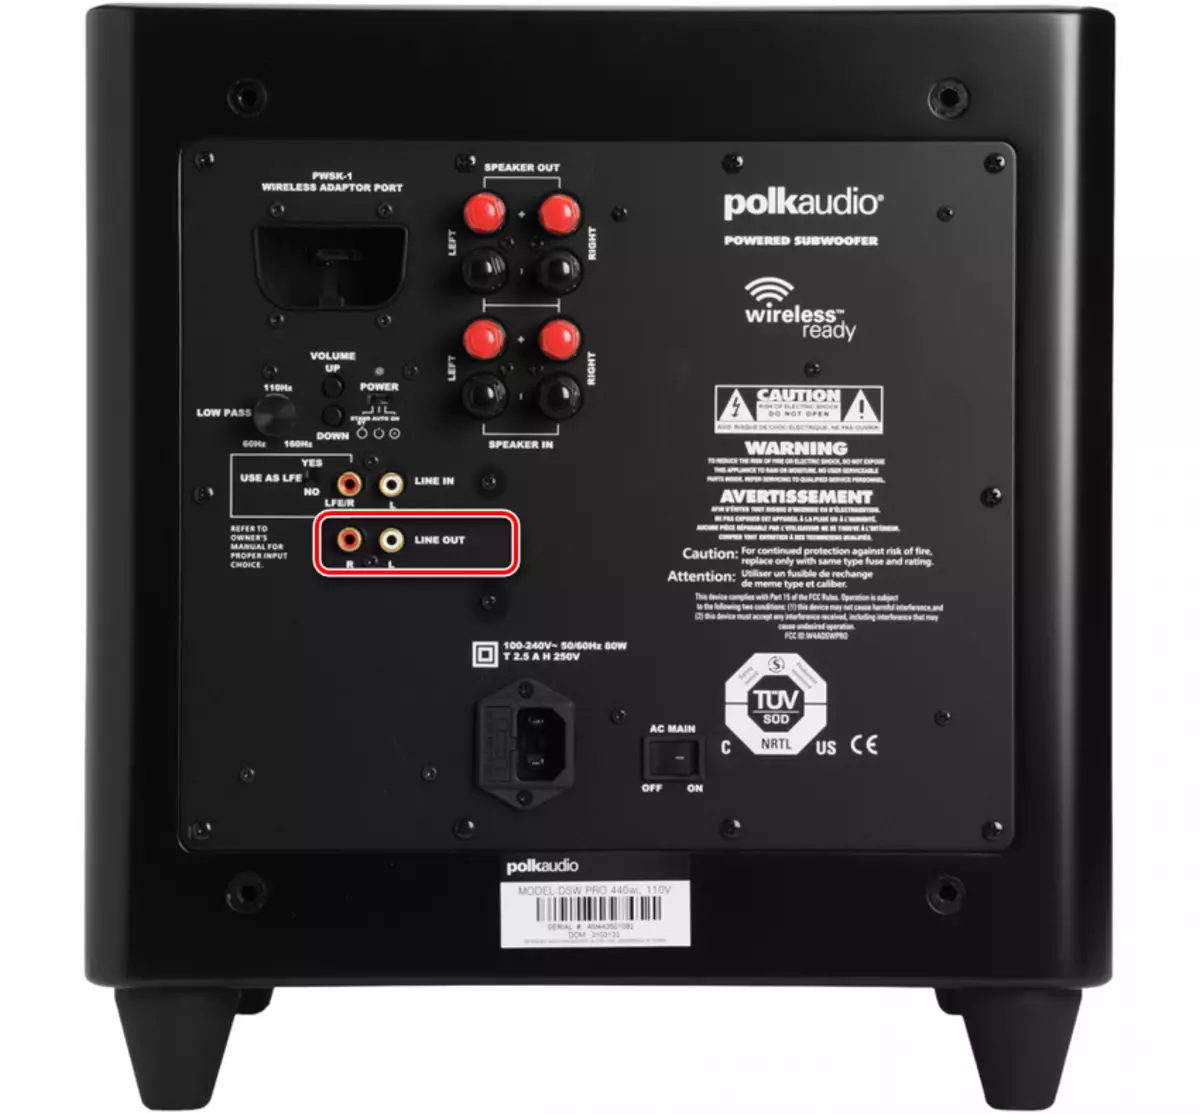 Output connectors for connecting an acoustic system on the subwoofer